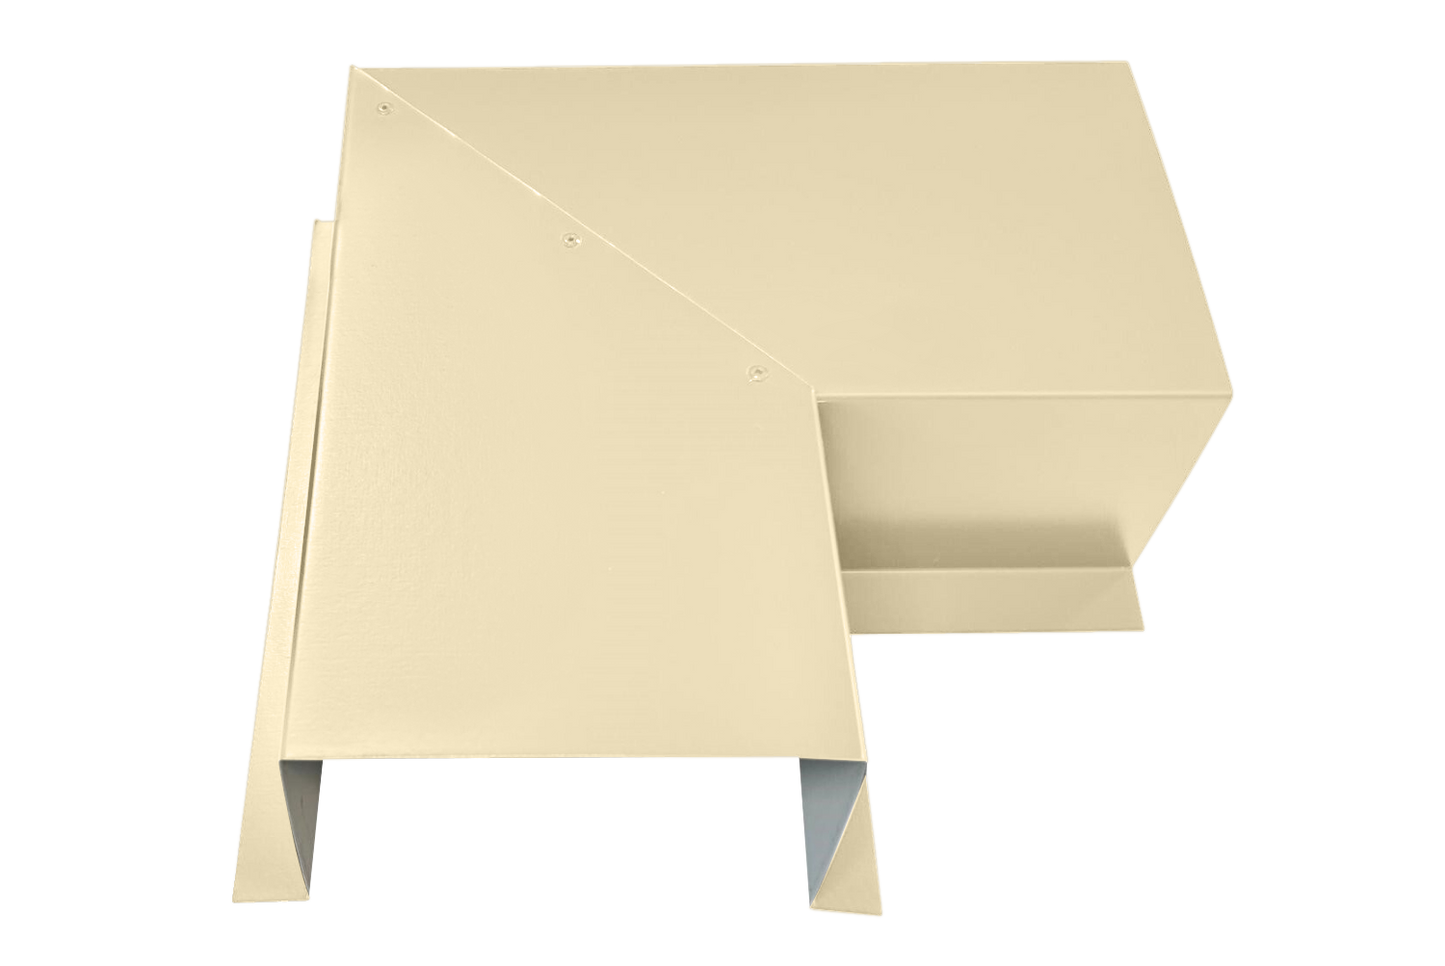 A beige, angular metal duct connector made of premium quality 24 gauge steel is shown with precise bends and seams. Used for HVAC systems, this piece features a rectangular and L-shaped configuration suitable for connecting ducts at a right angle, ensuring easy installation. This specific product is the Commercial Series - 24 Gauge Line Set Cover Side Turning Elbows - Premium Quality by Perma Cover.